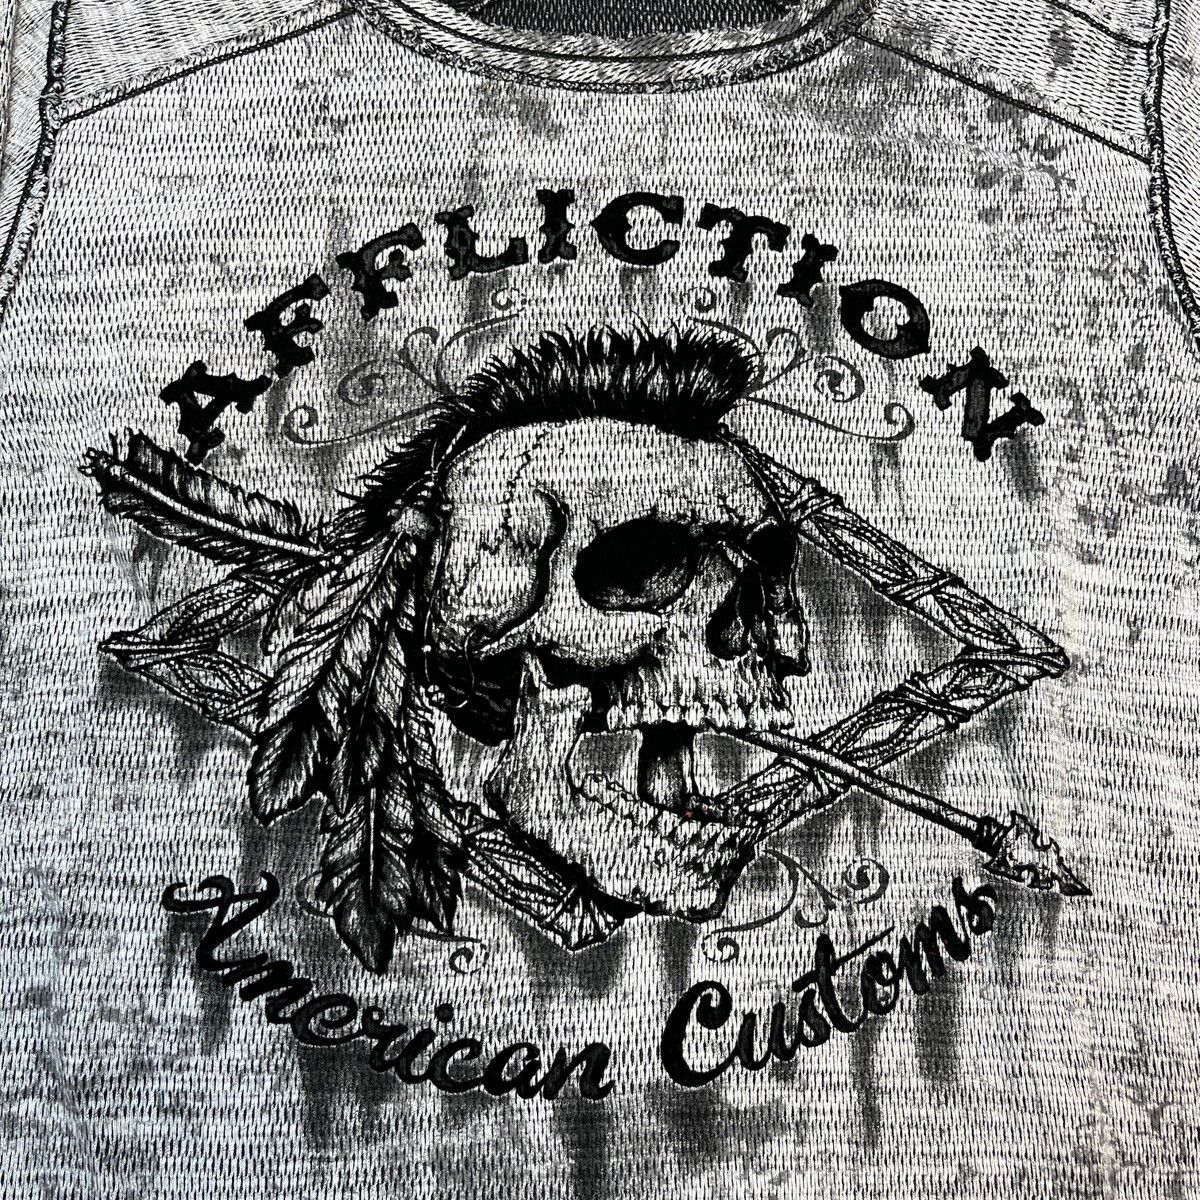 Vintage Affliction Thermal Reversible Skull Indian American Customs Size US L / EU 52-54 / 3 - 2 Preview